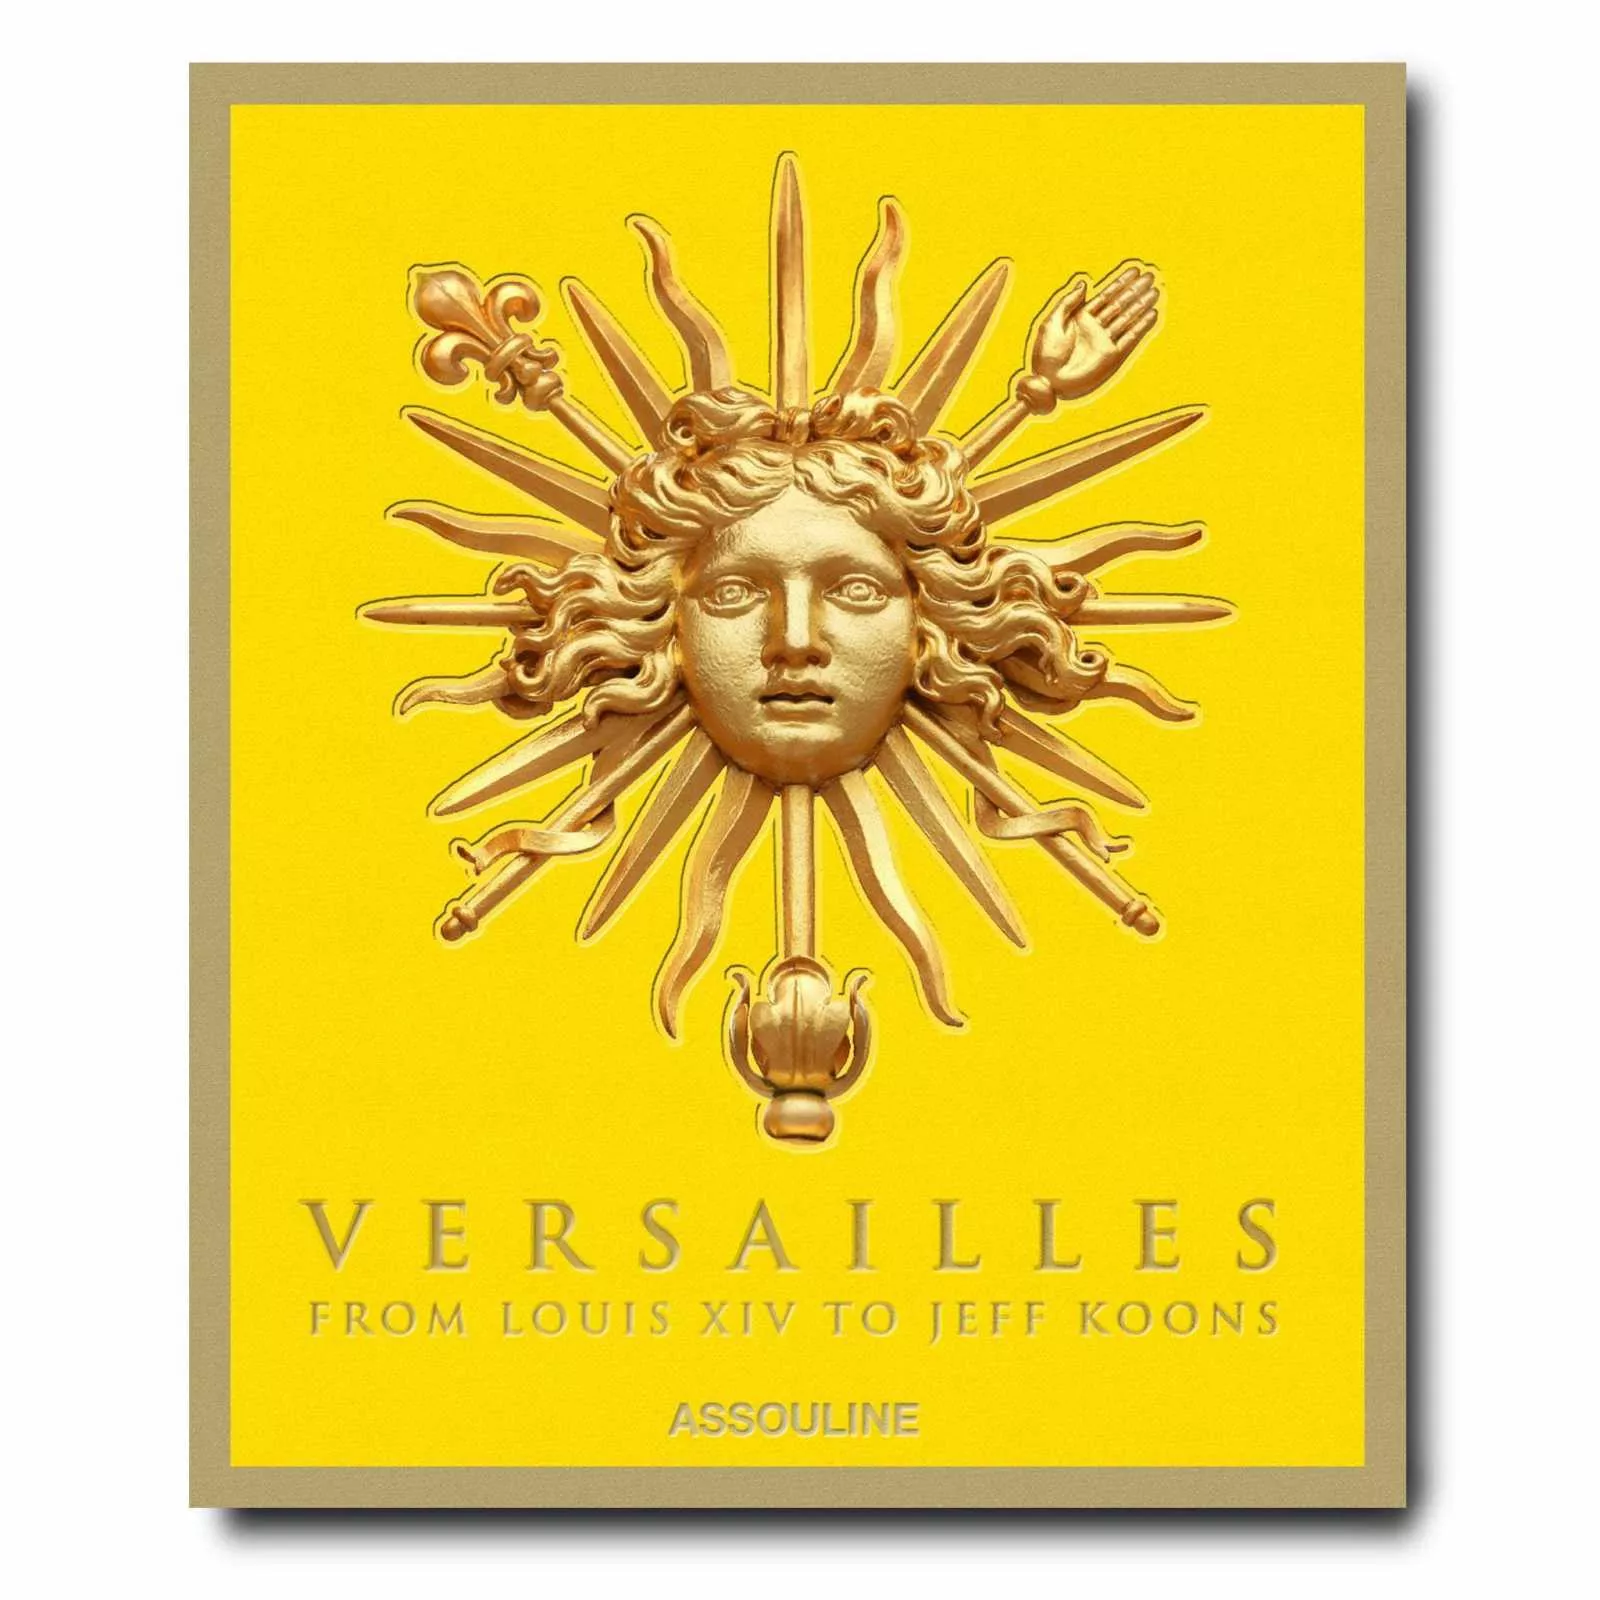 Книга "Versailles:From Louis XIV to Jeff Koons" Assouline Ultimate&Special Editions (9781614289623) - Фото nav 1